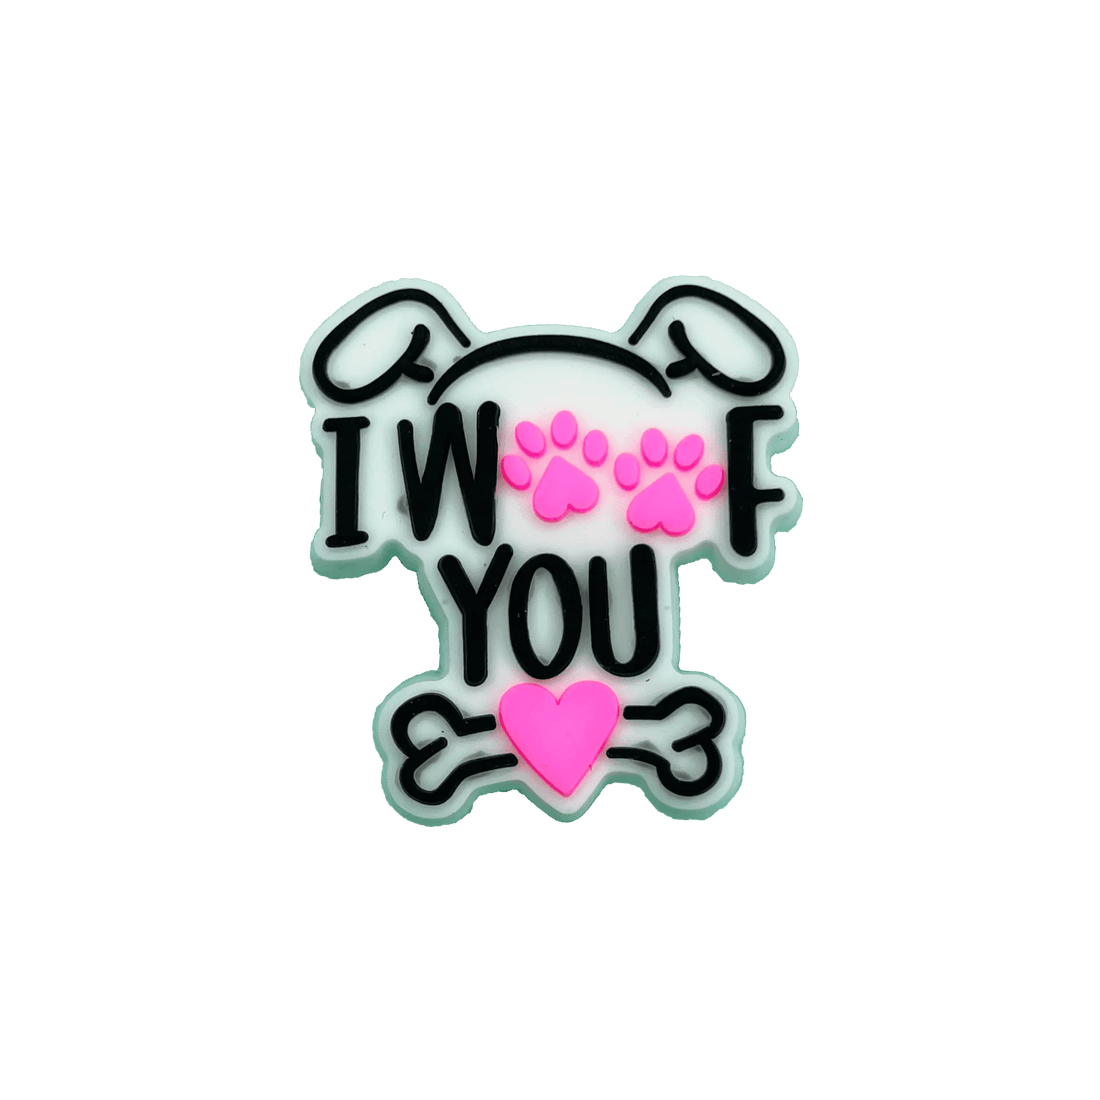 I Woof You Charm Charms By Prince